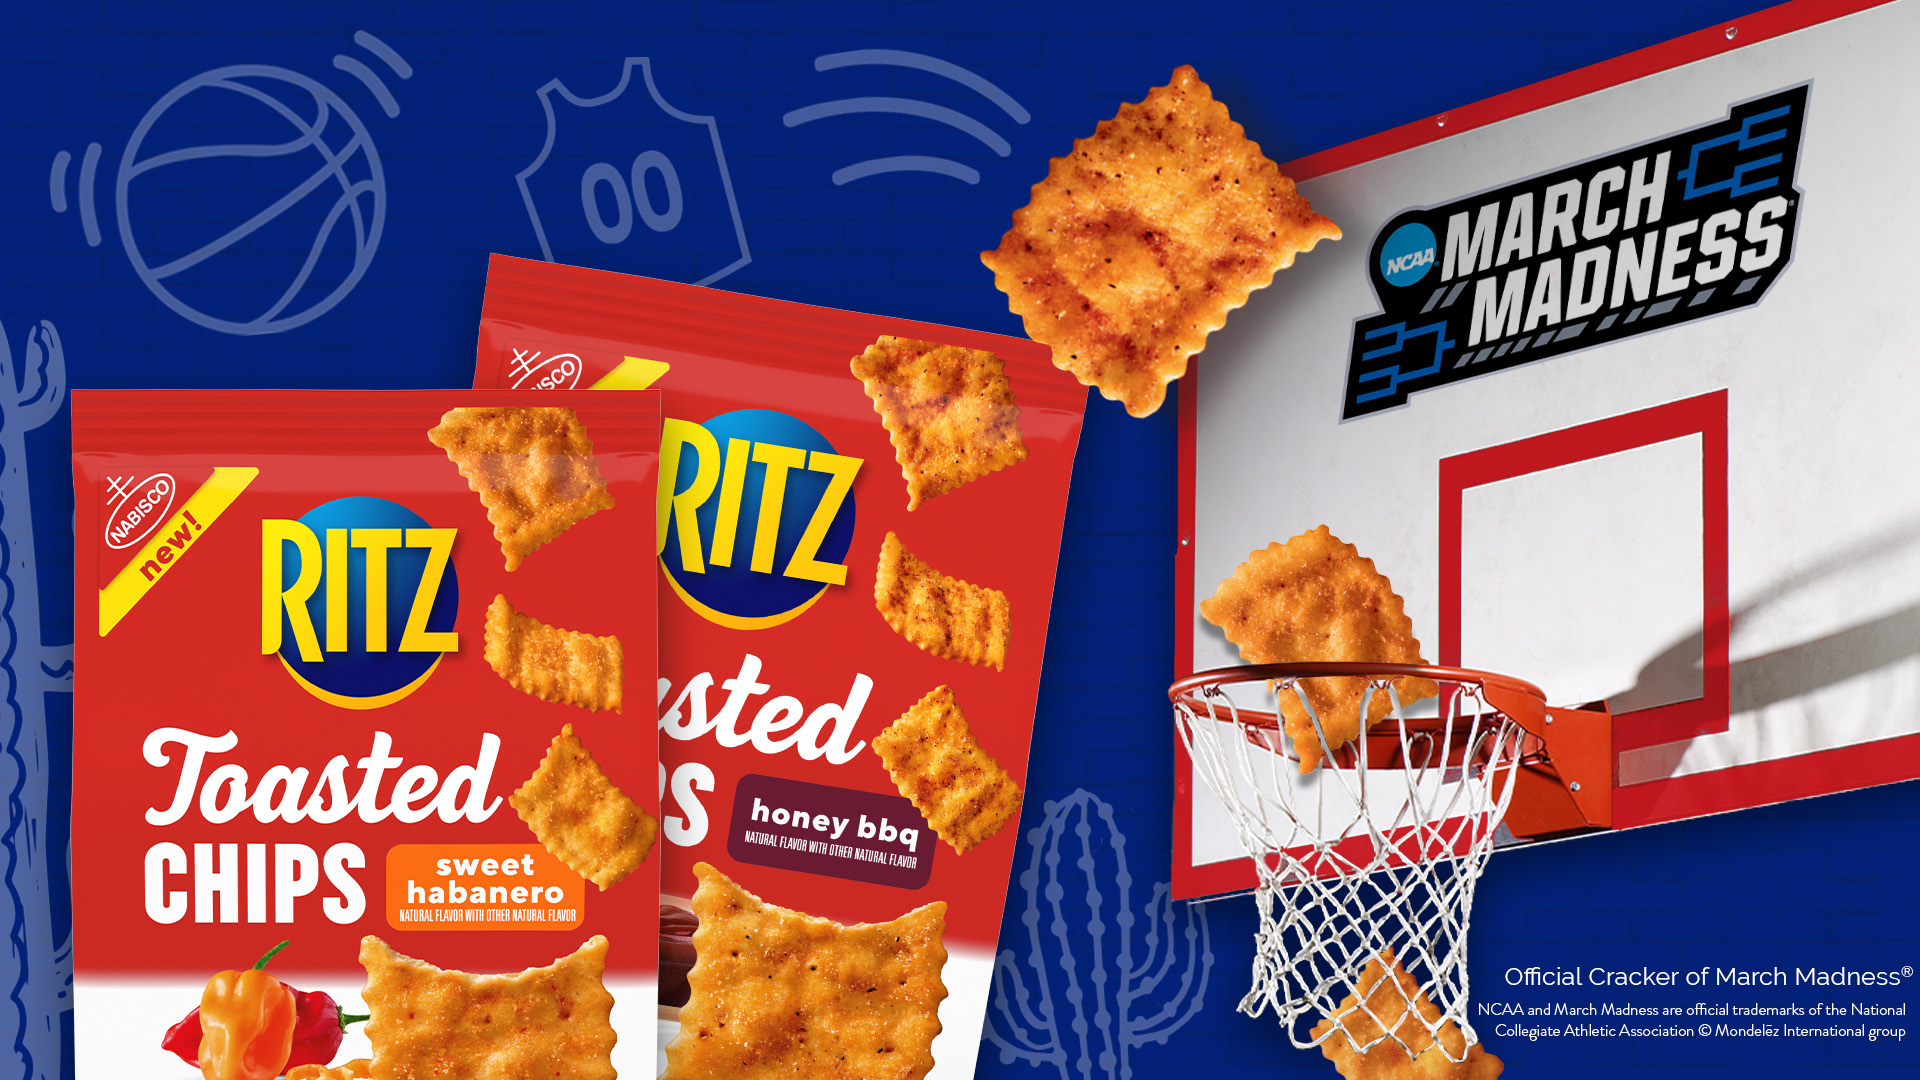 RITZ March Madness